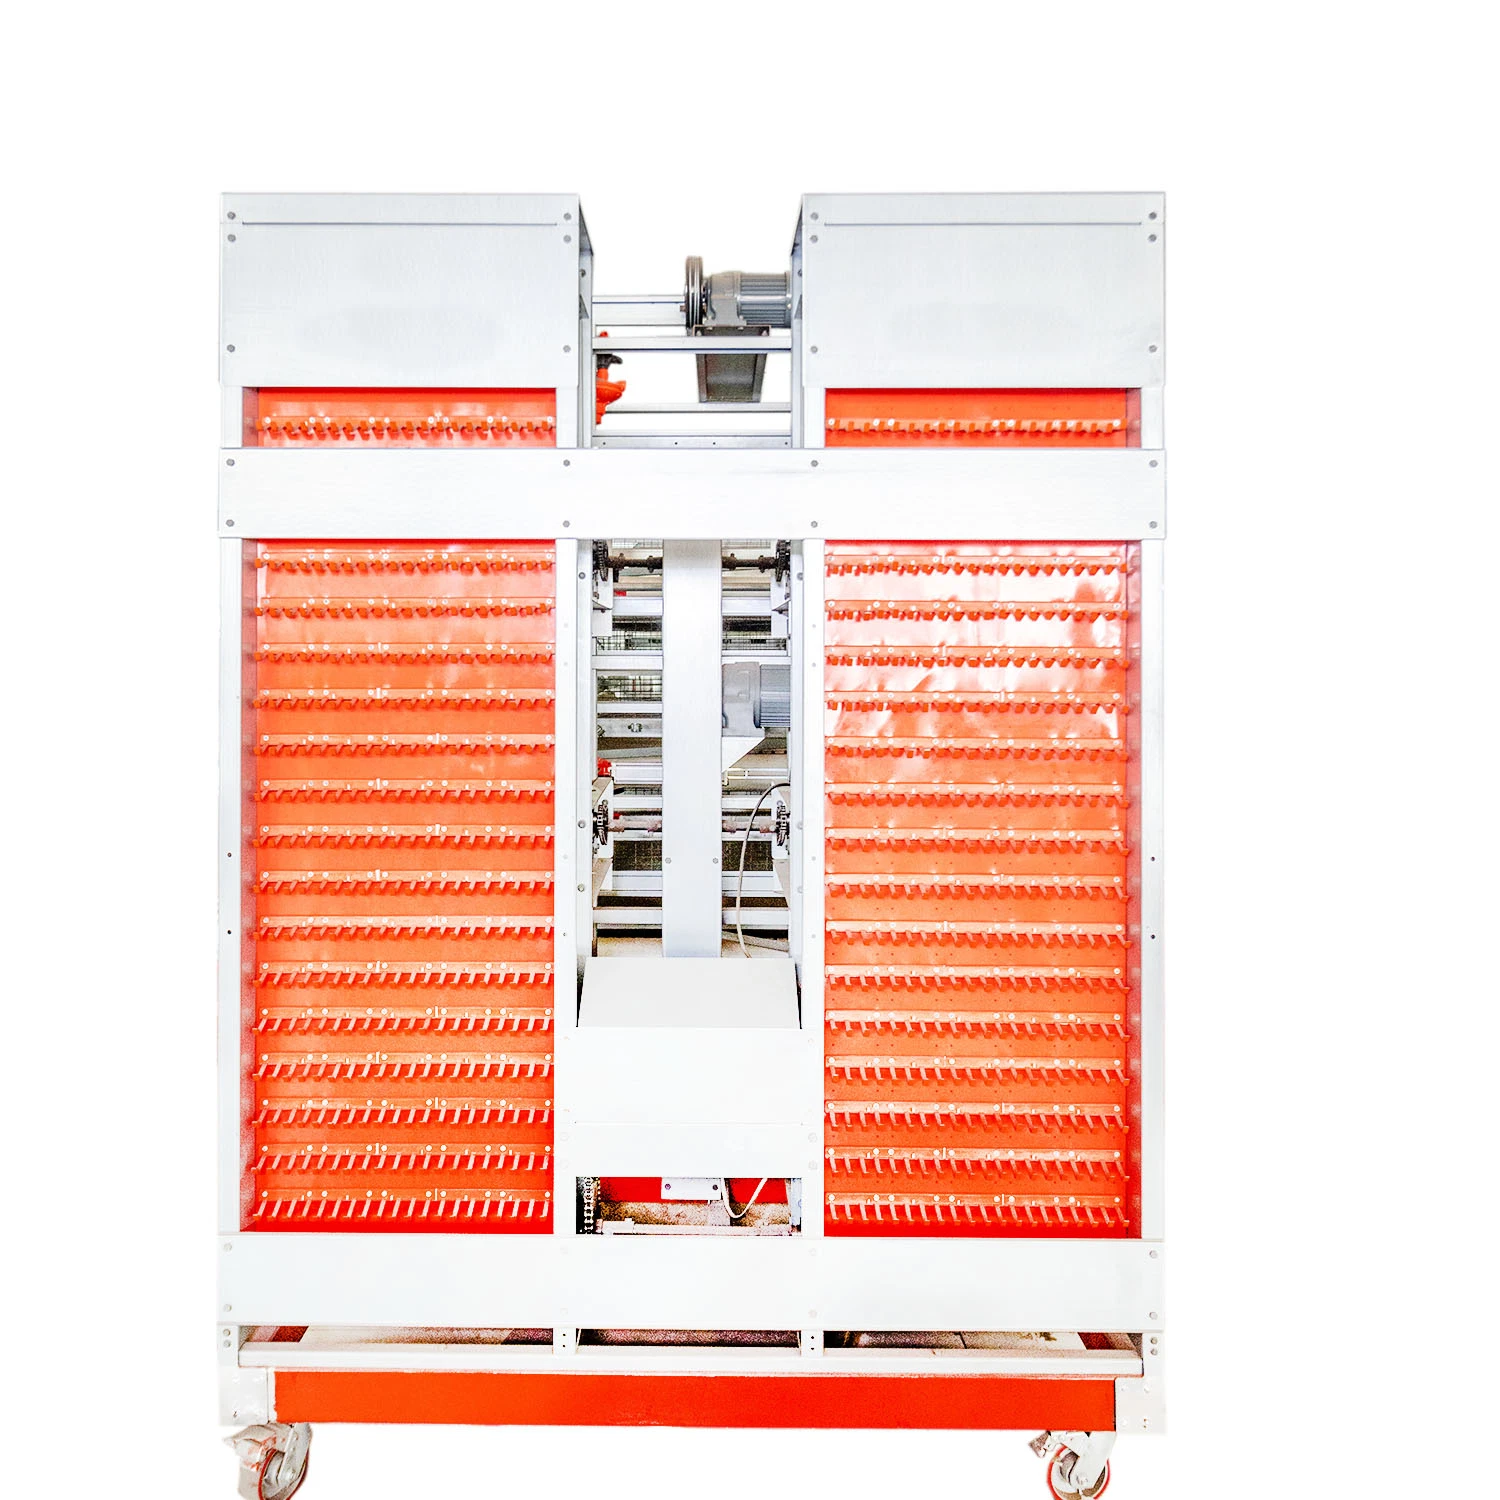 Poultry Chicken Farm Husbandry Automatic Feeding Equipment Layer Cage System